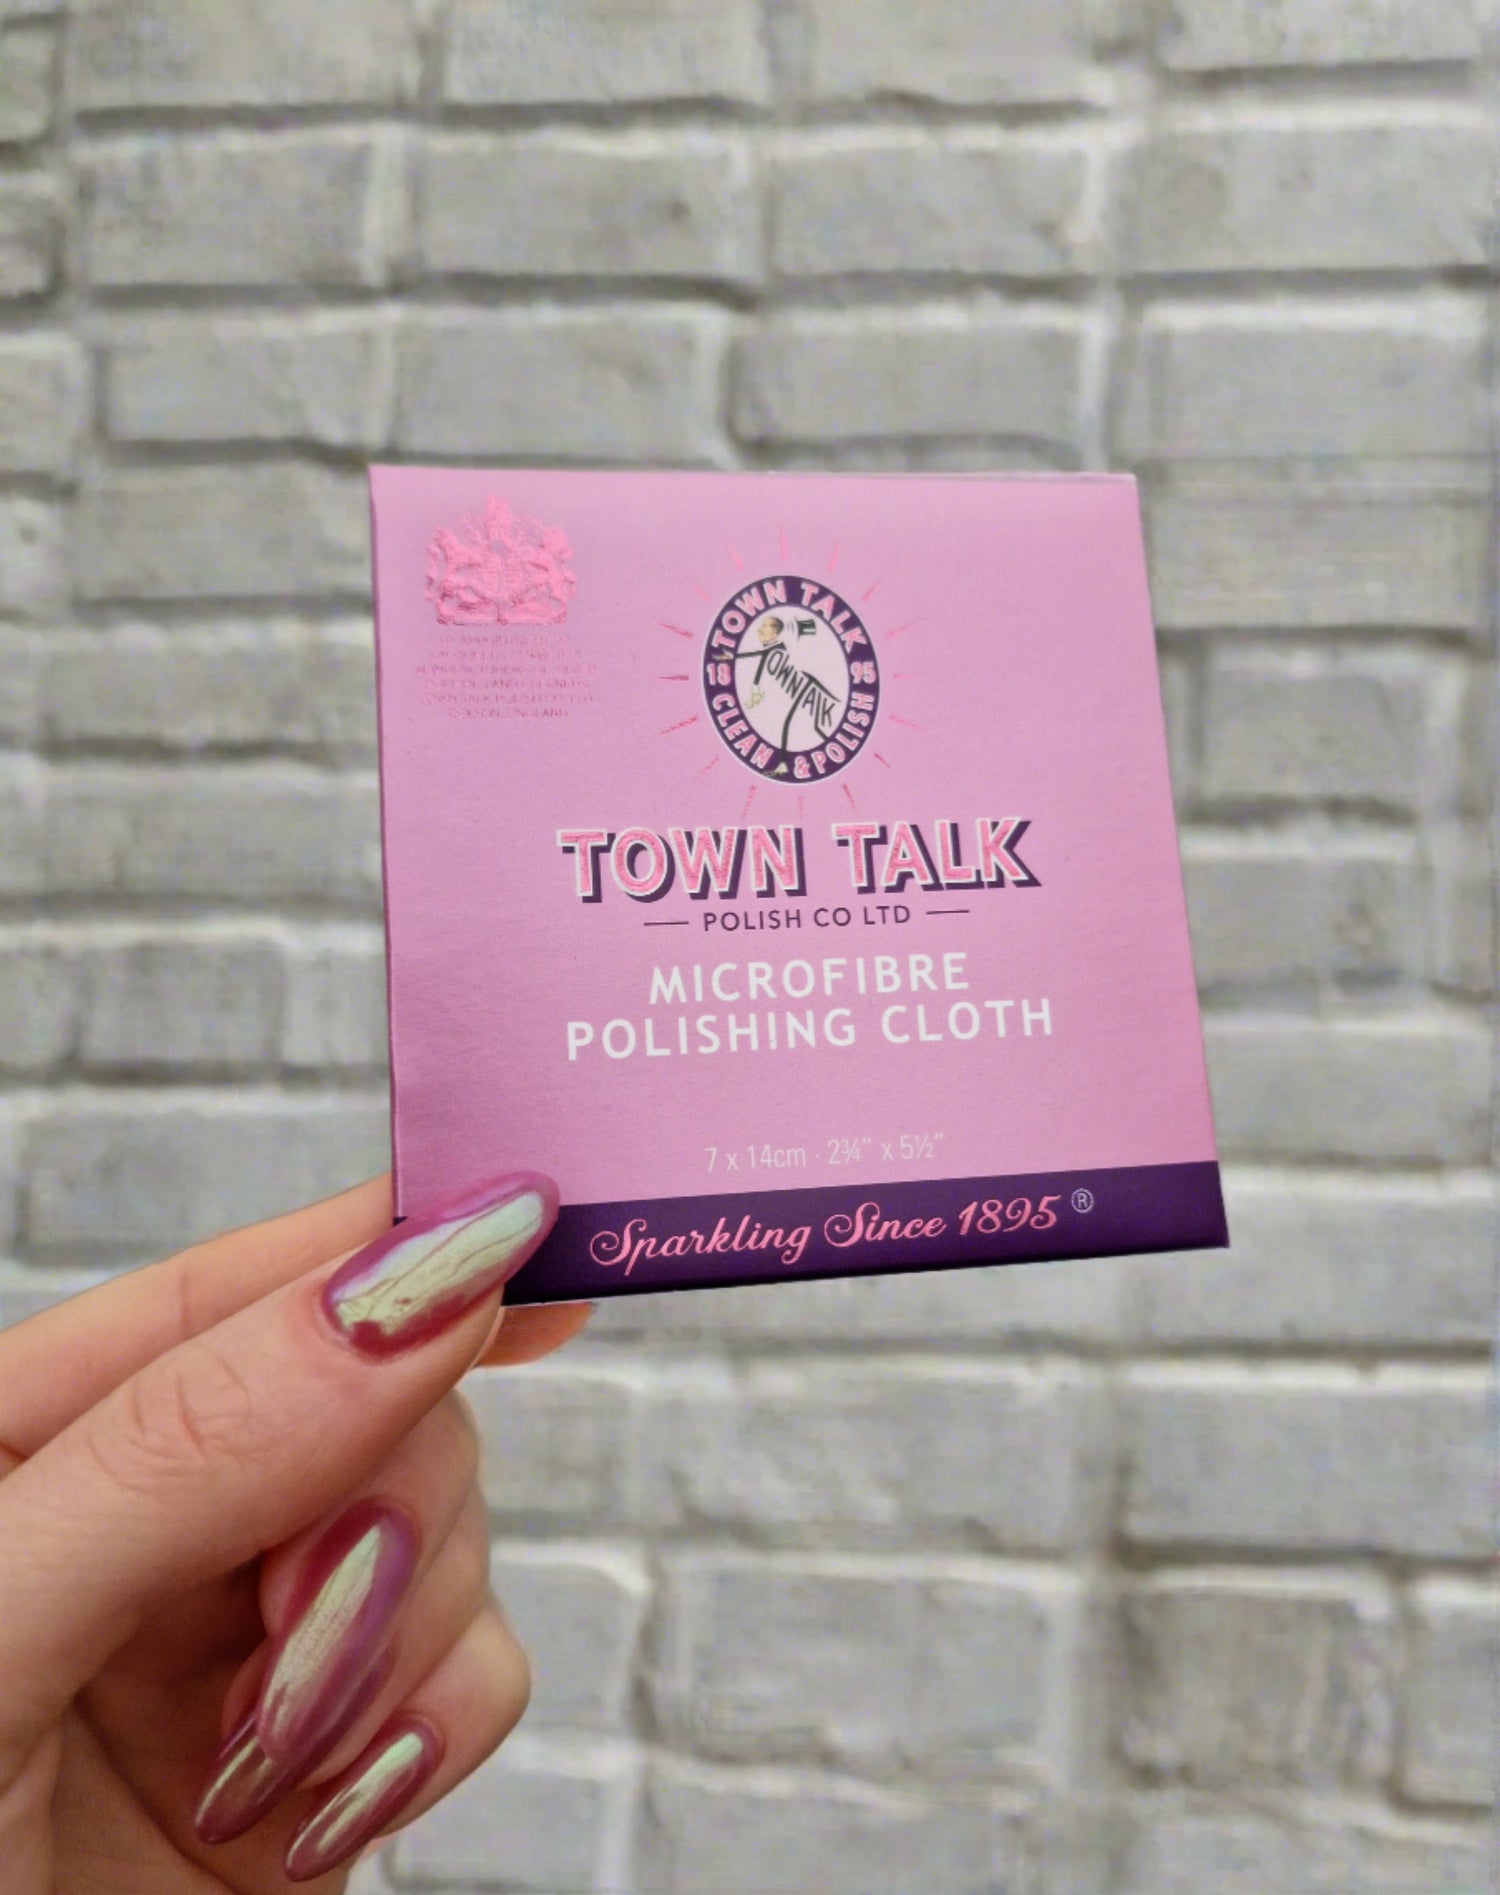  Outer packaging for the microfiber jewellery cloth. A small purple packet with Town Talk logo on the front. Brick wall as a background.